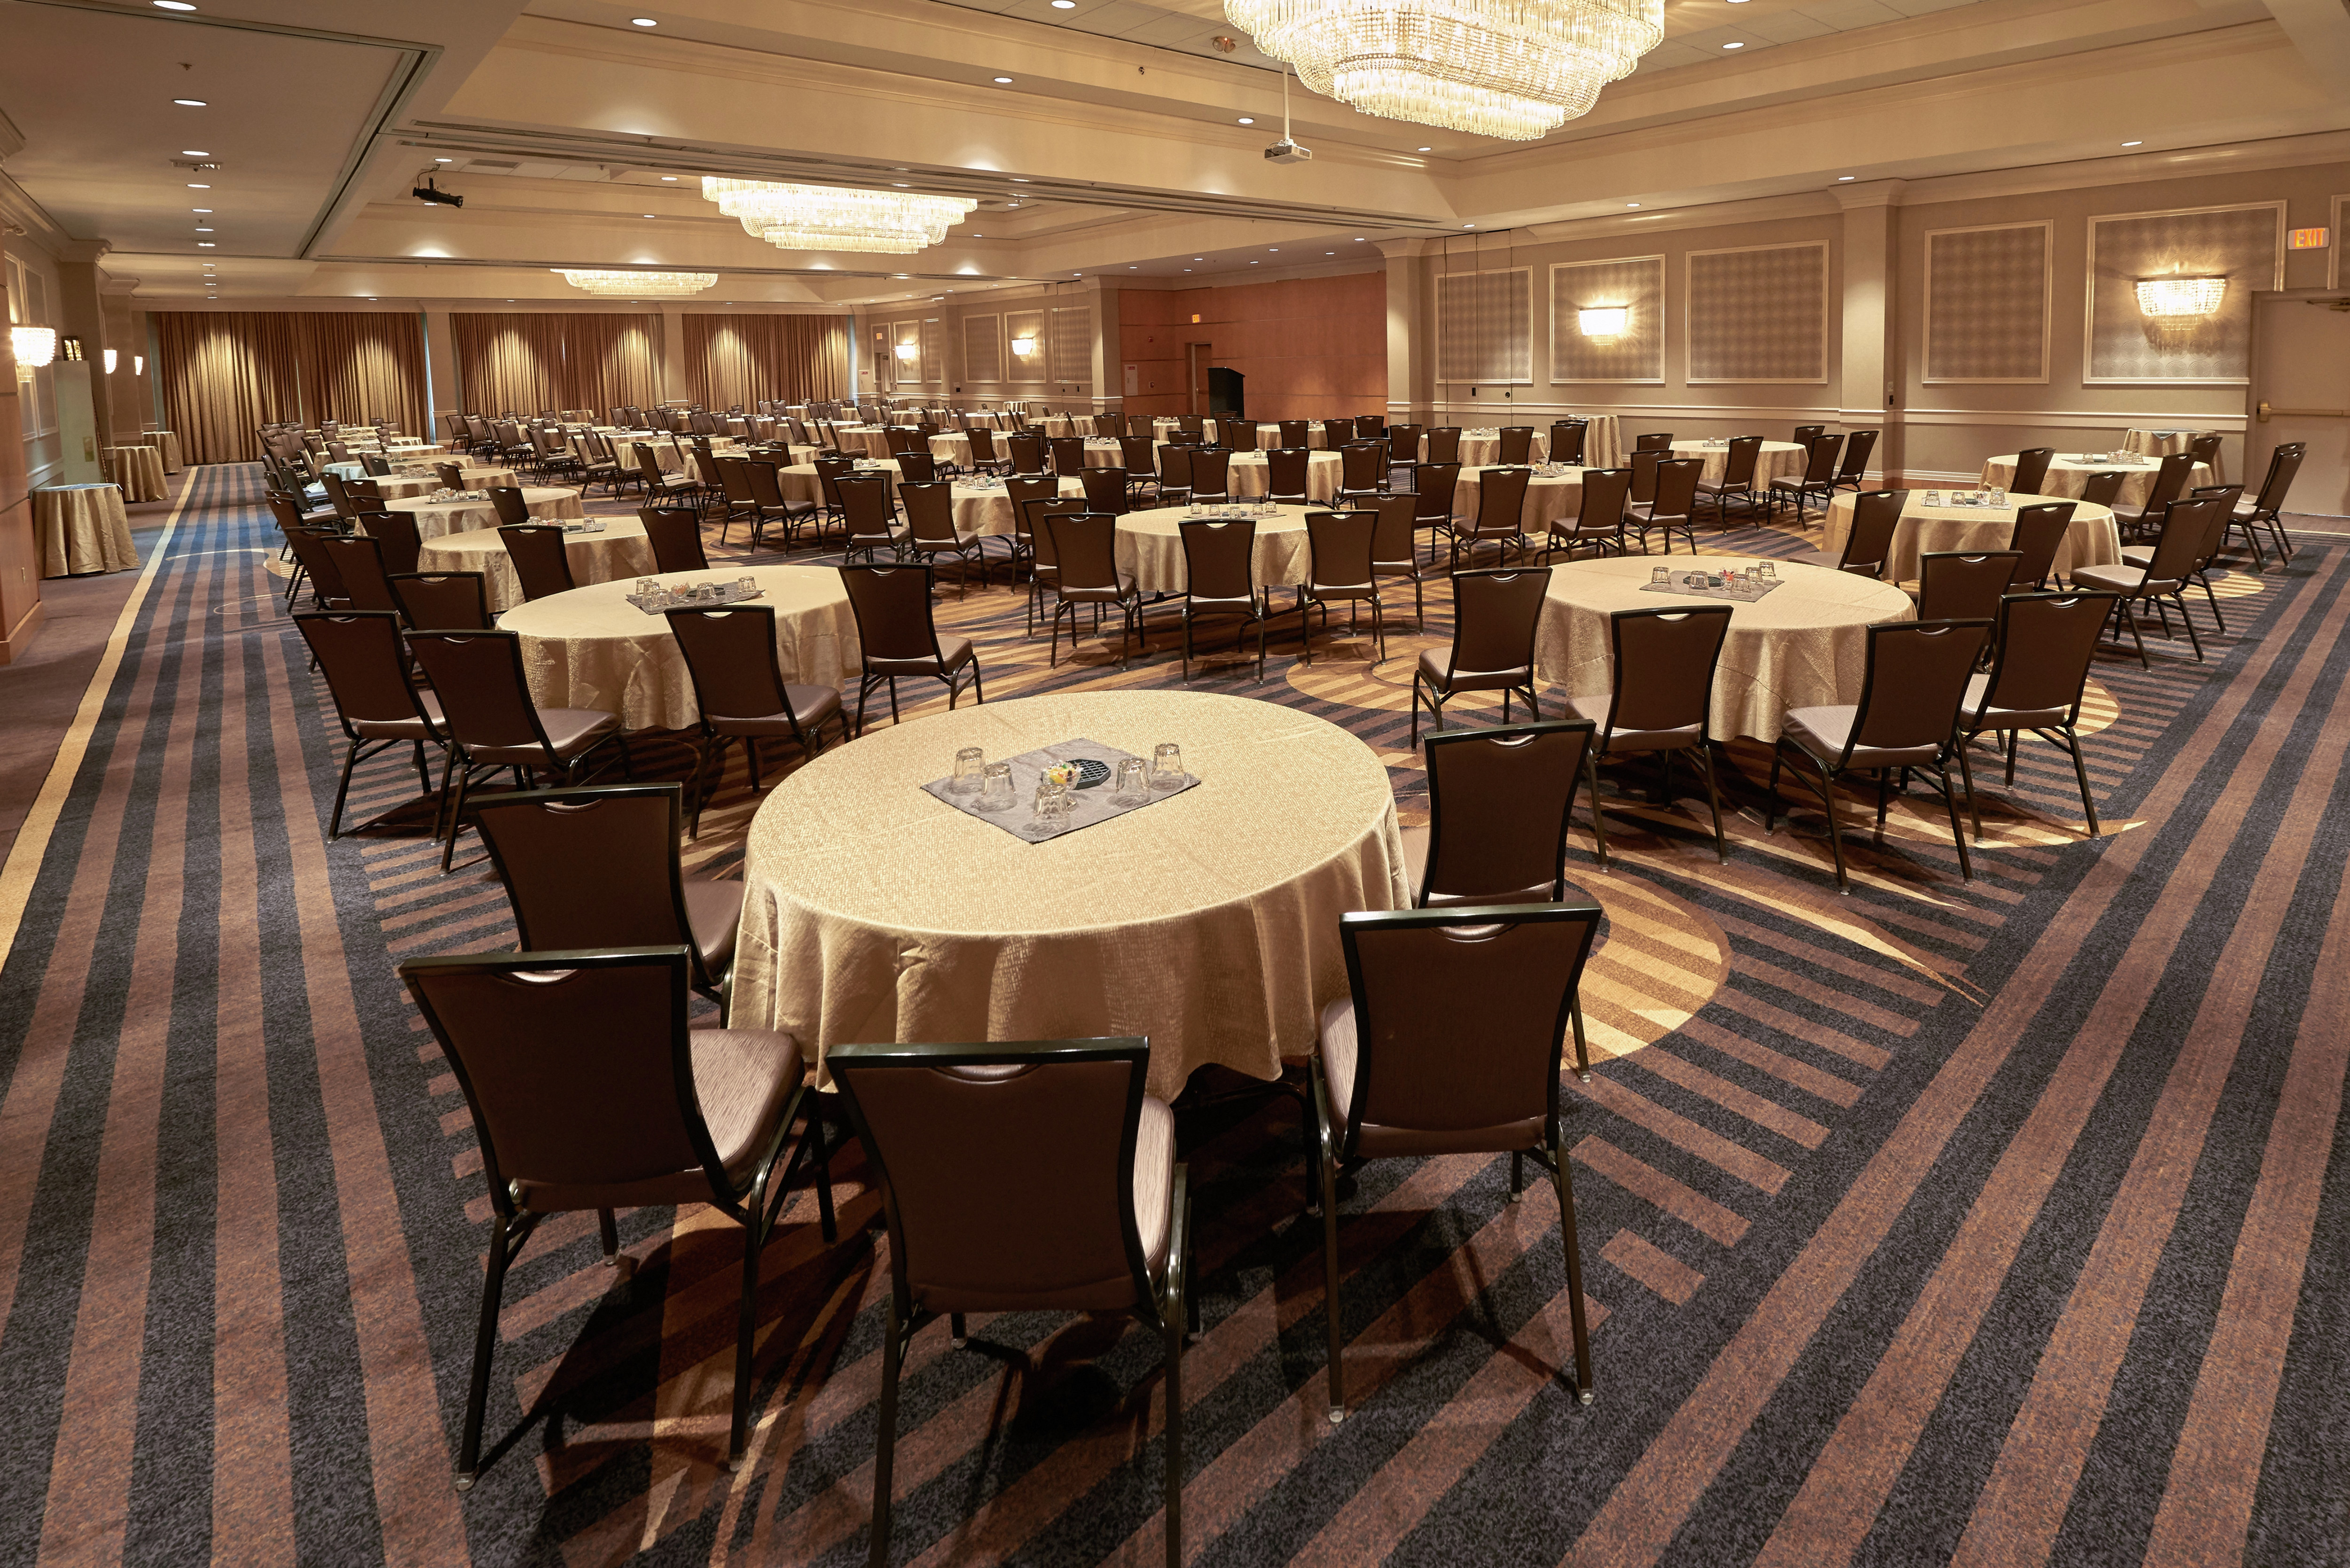 Grand Ballroom with round tables